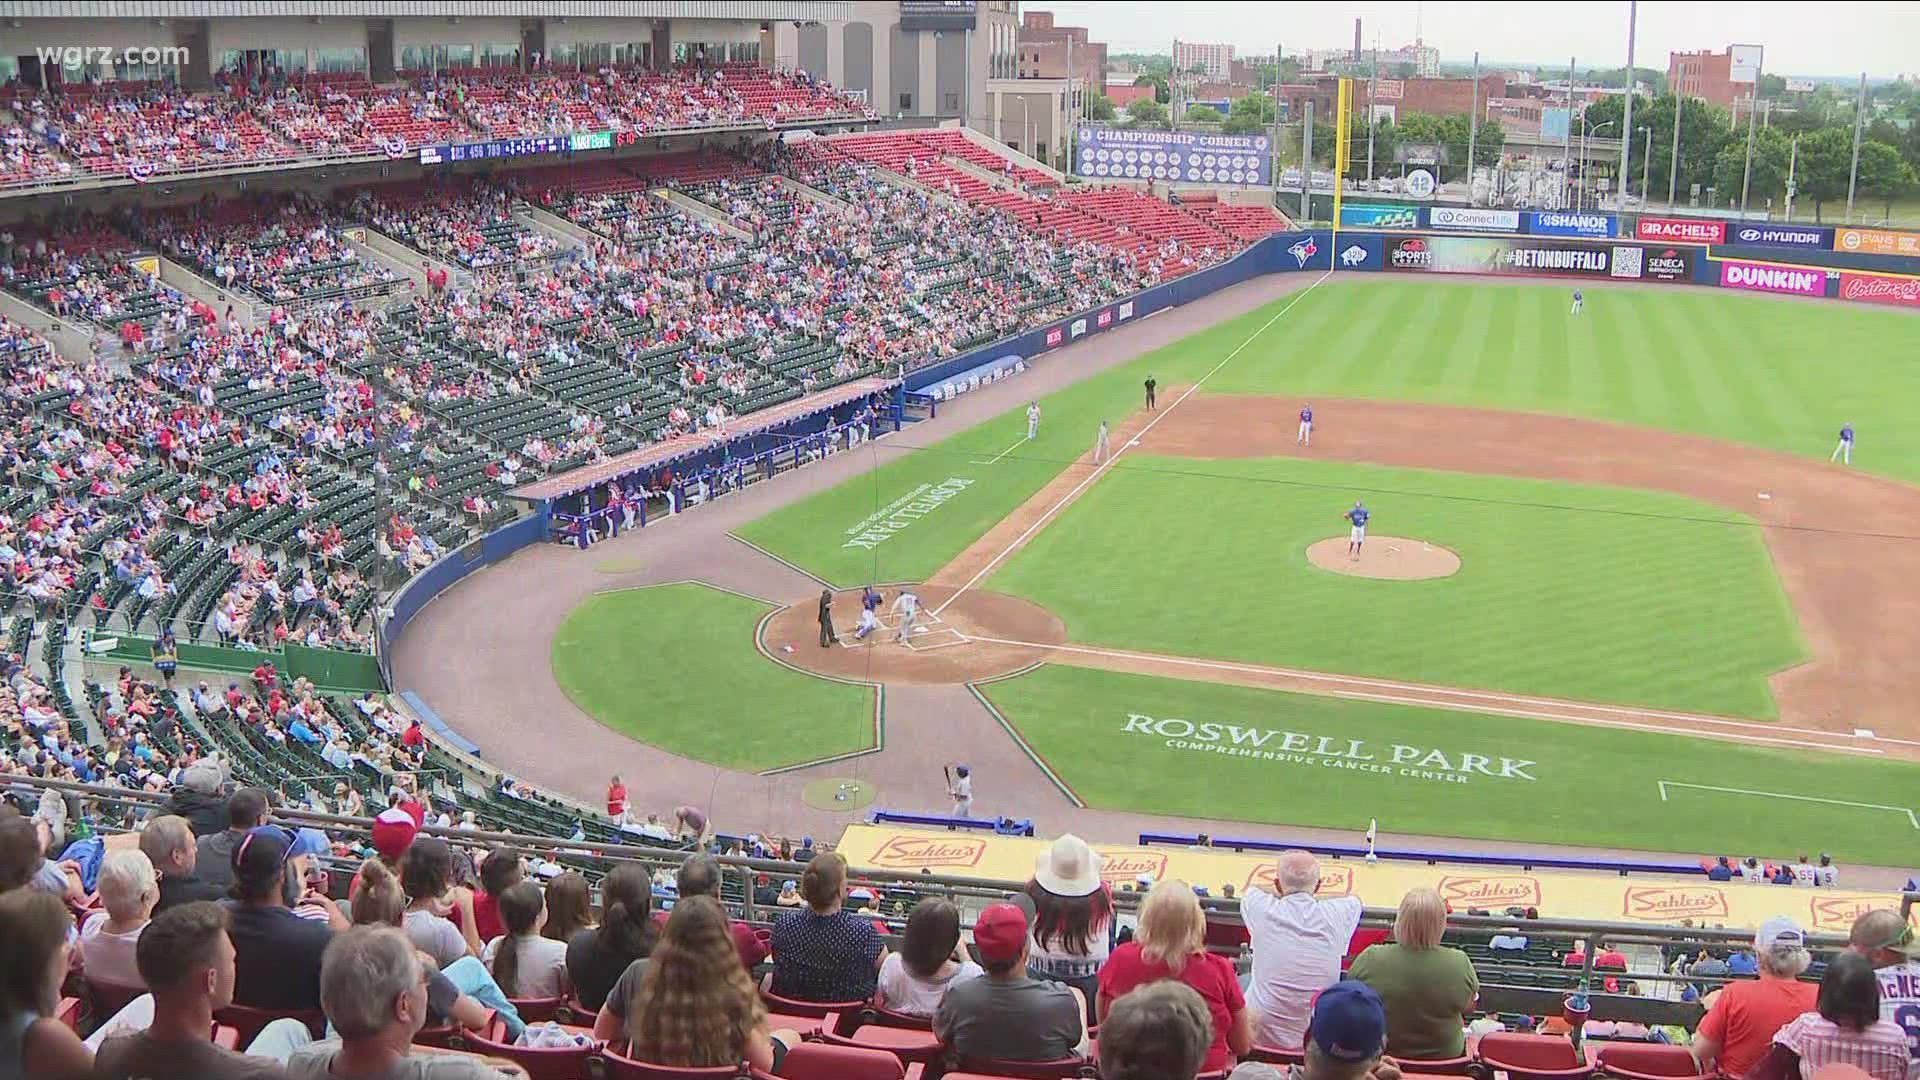 For world War 2 veteran Roy Kinyon, it was one holiday he will not soon forget, thanks to the Buffalo Bisons.